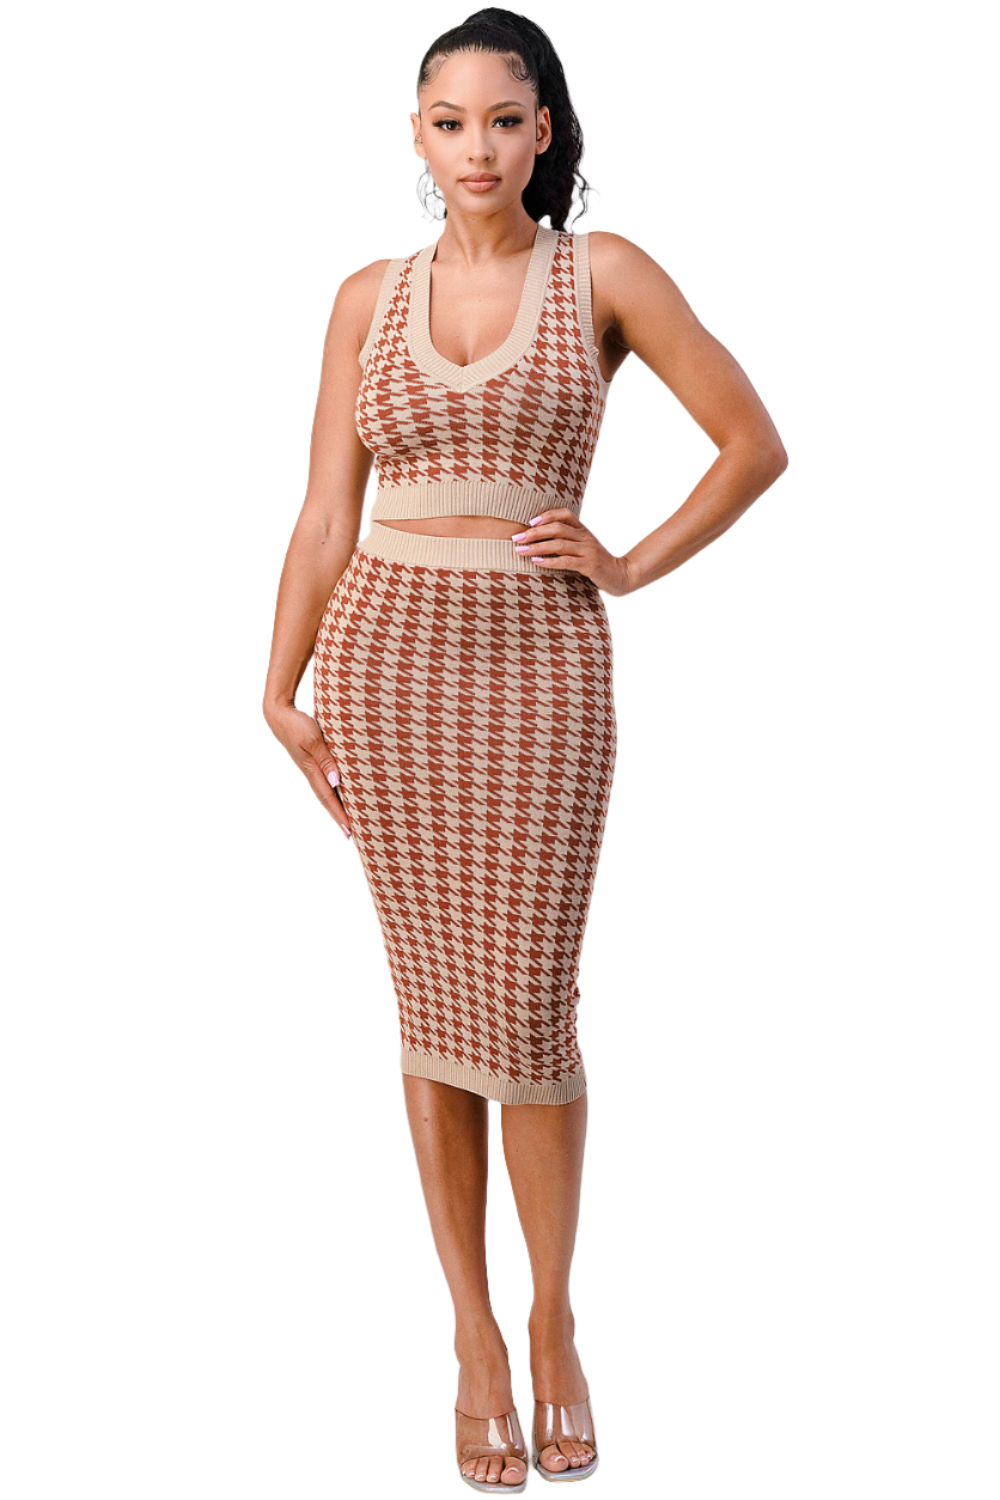 Luxe Gingham Rib Knit Top & Skirt Set in Taupe/Brown - Sizes S, M, L